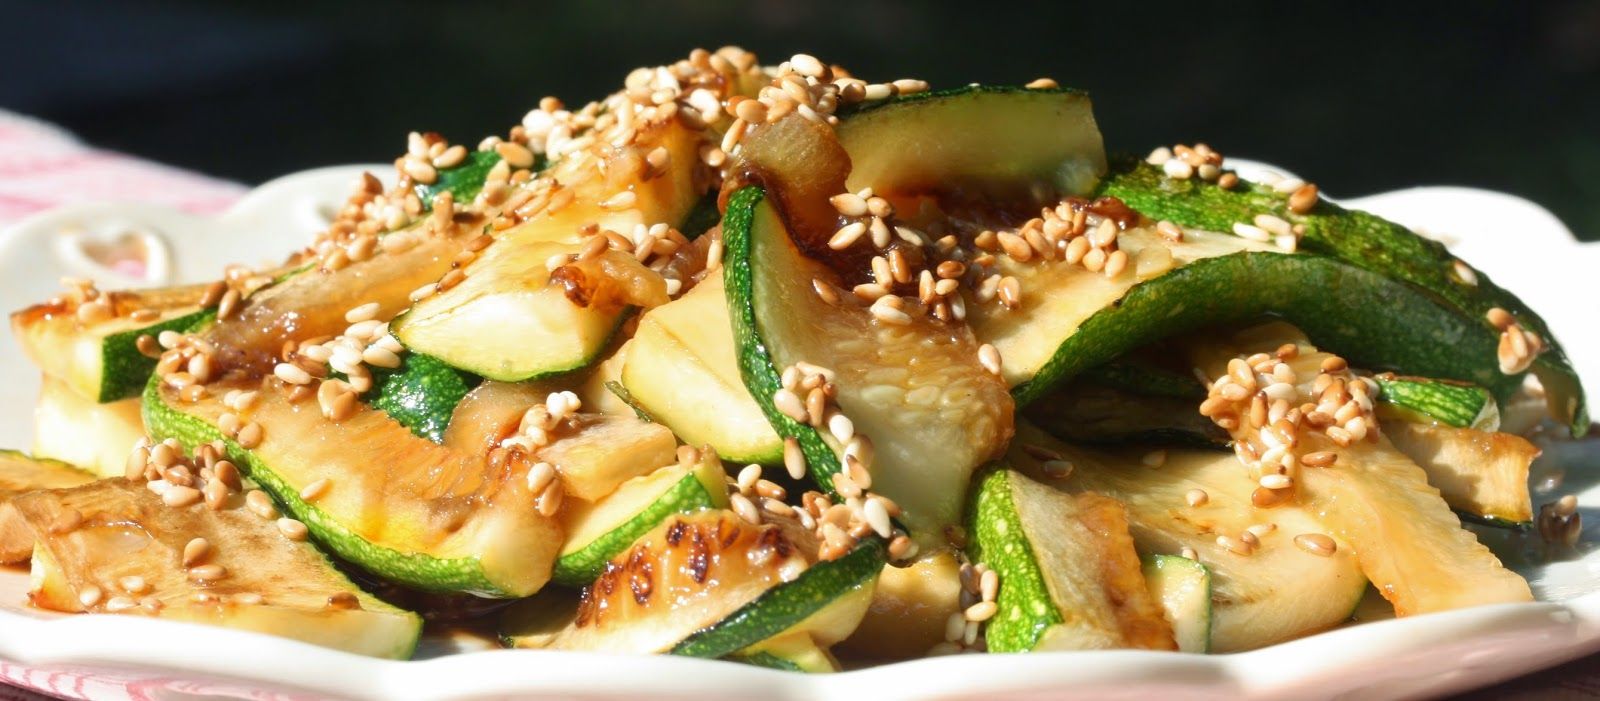 Flavorful Spicy Asian Zucchini Dish